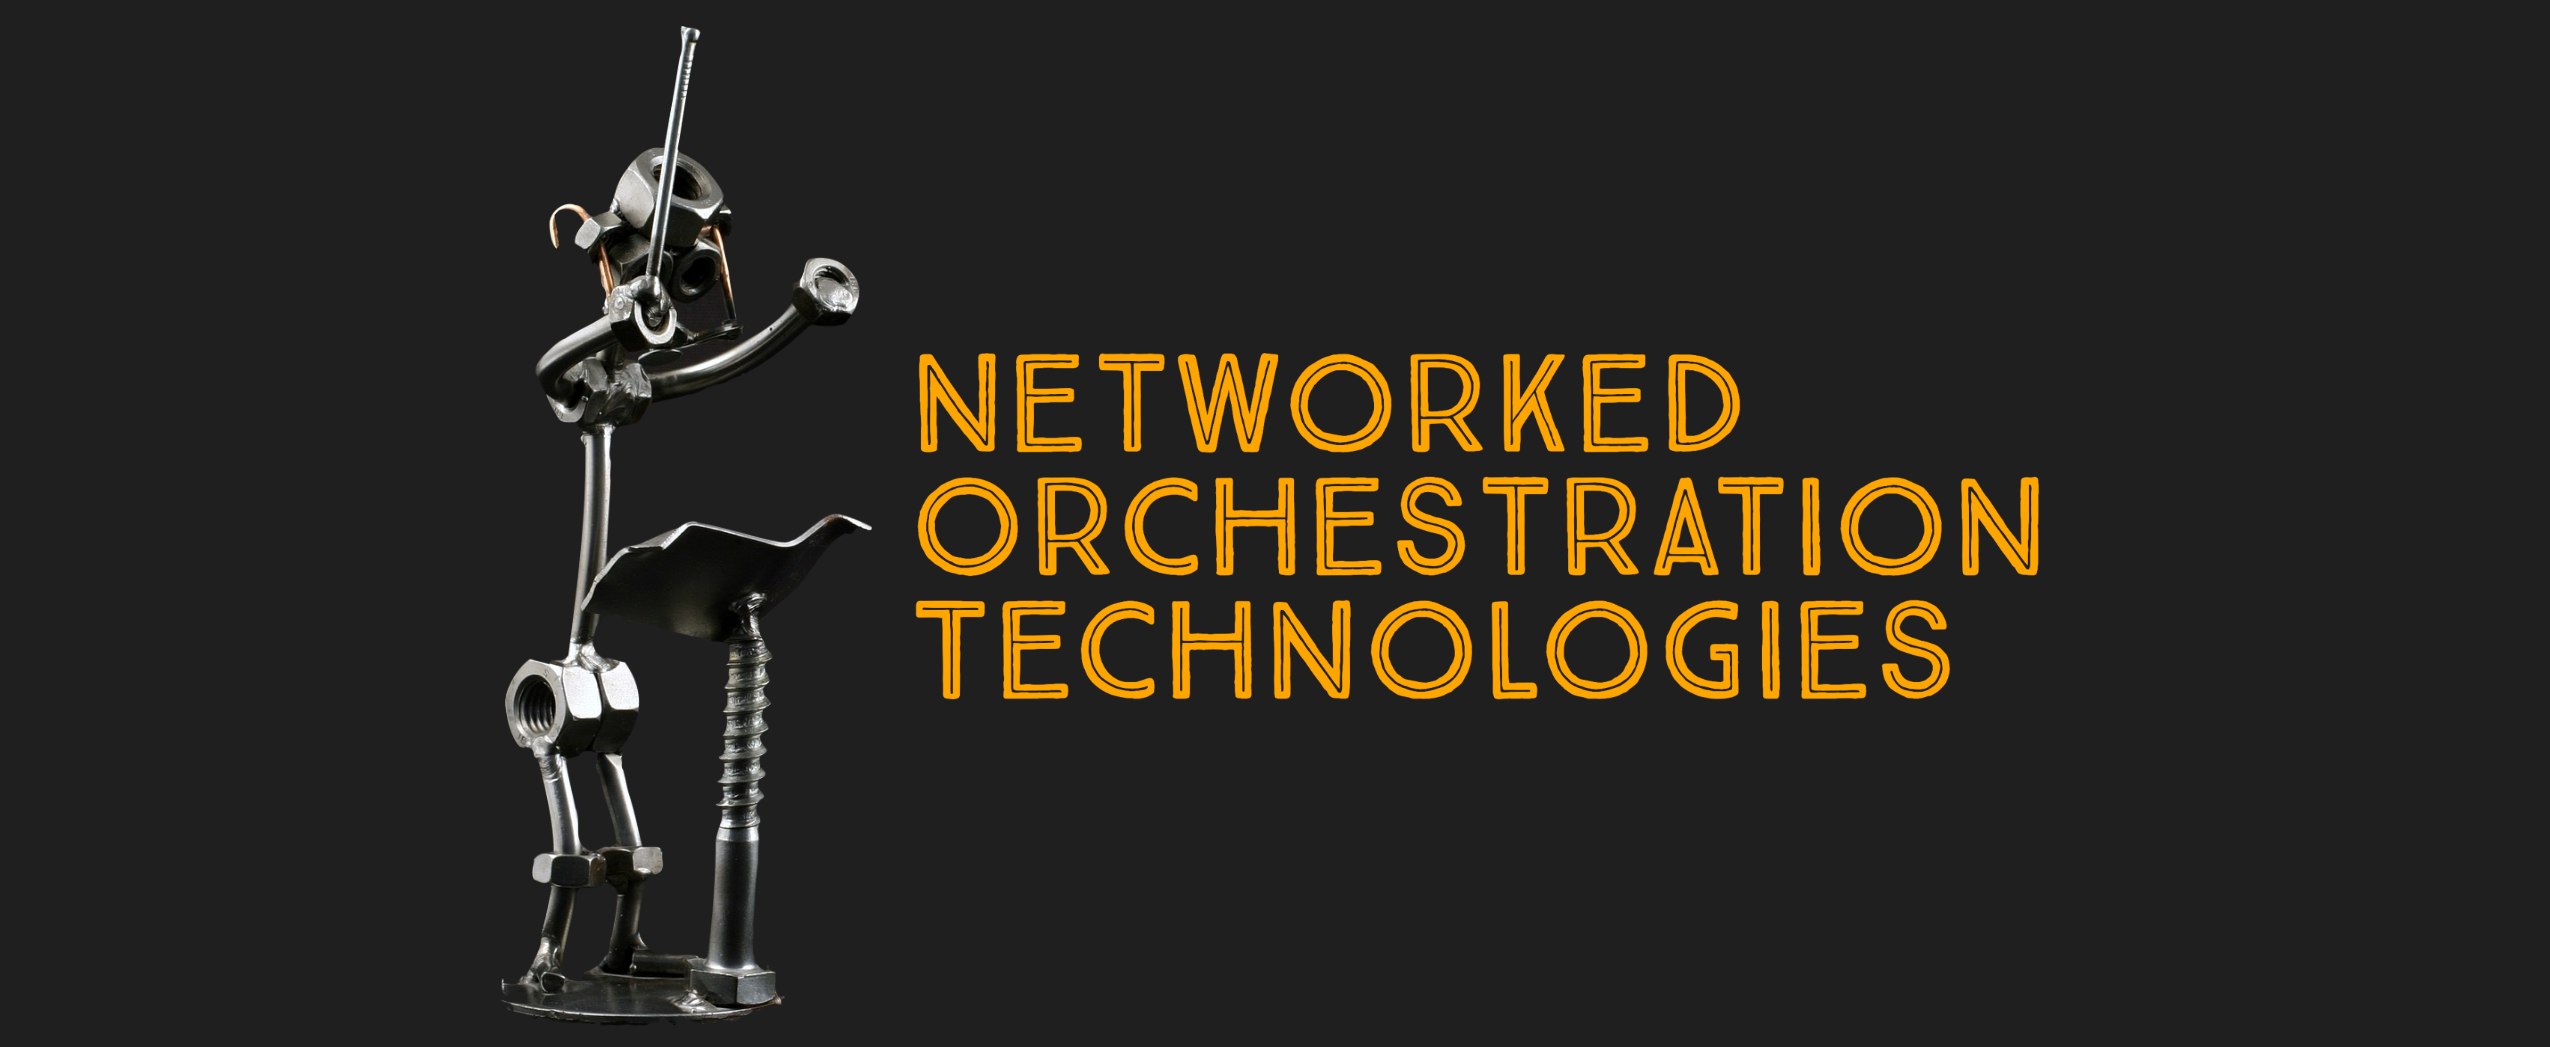 Networked Orchestration Technologies